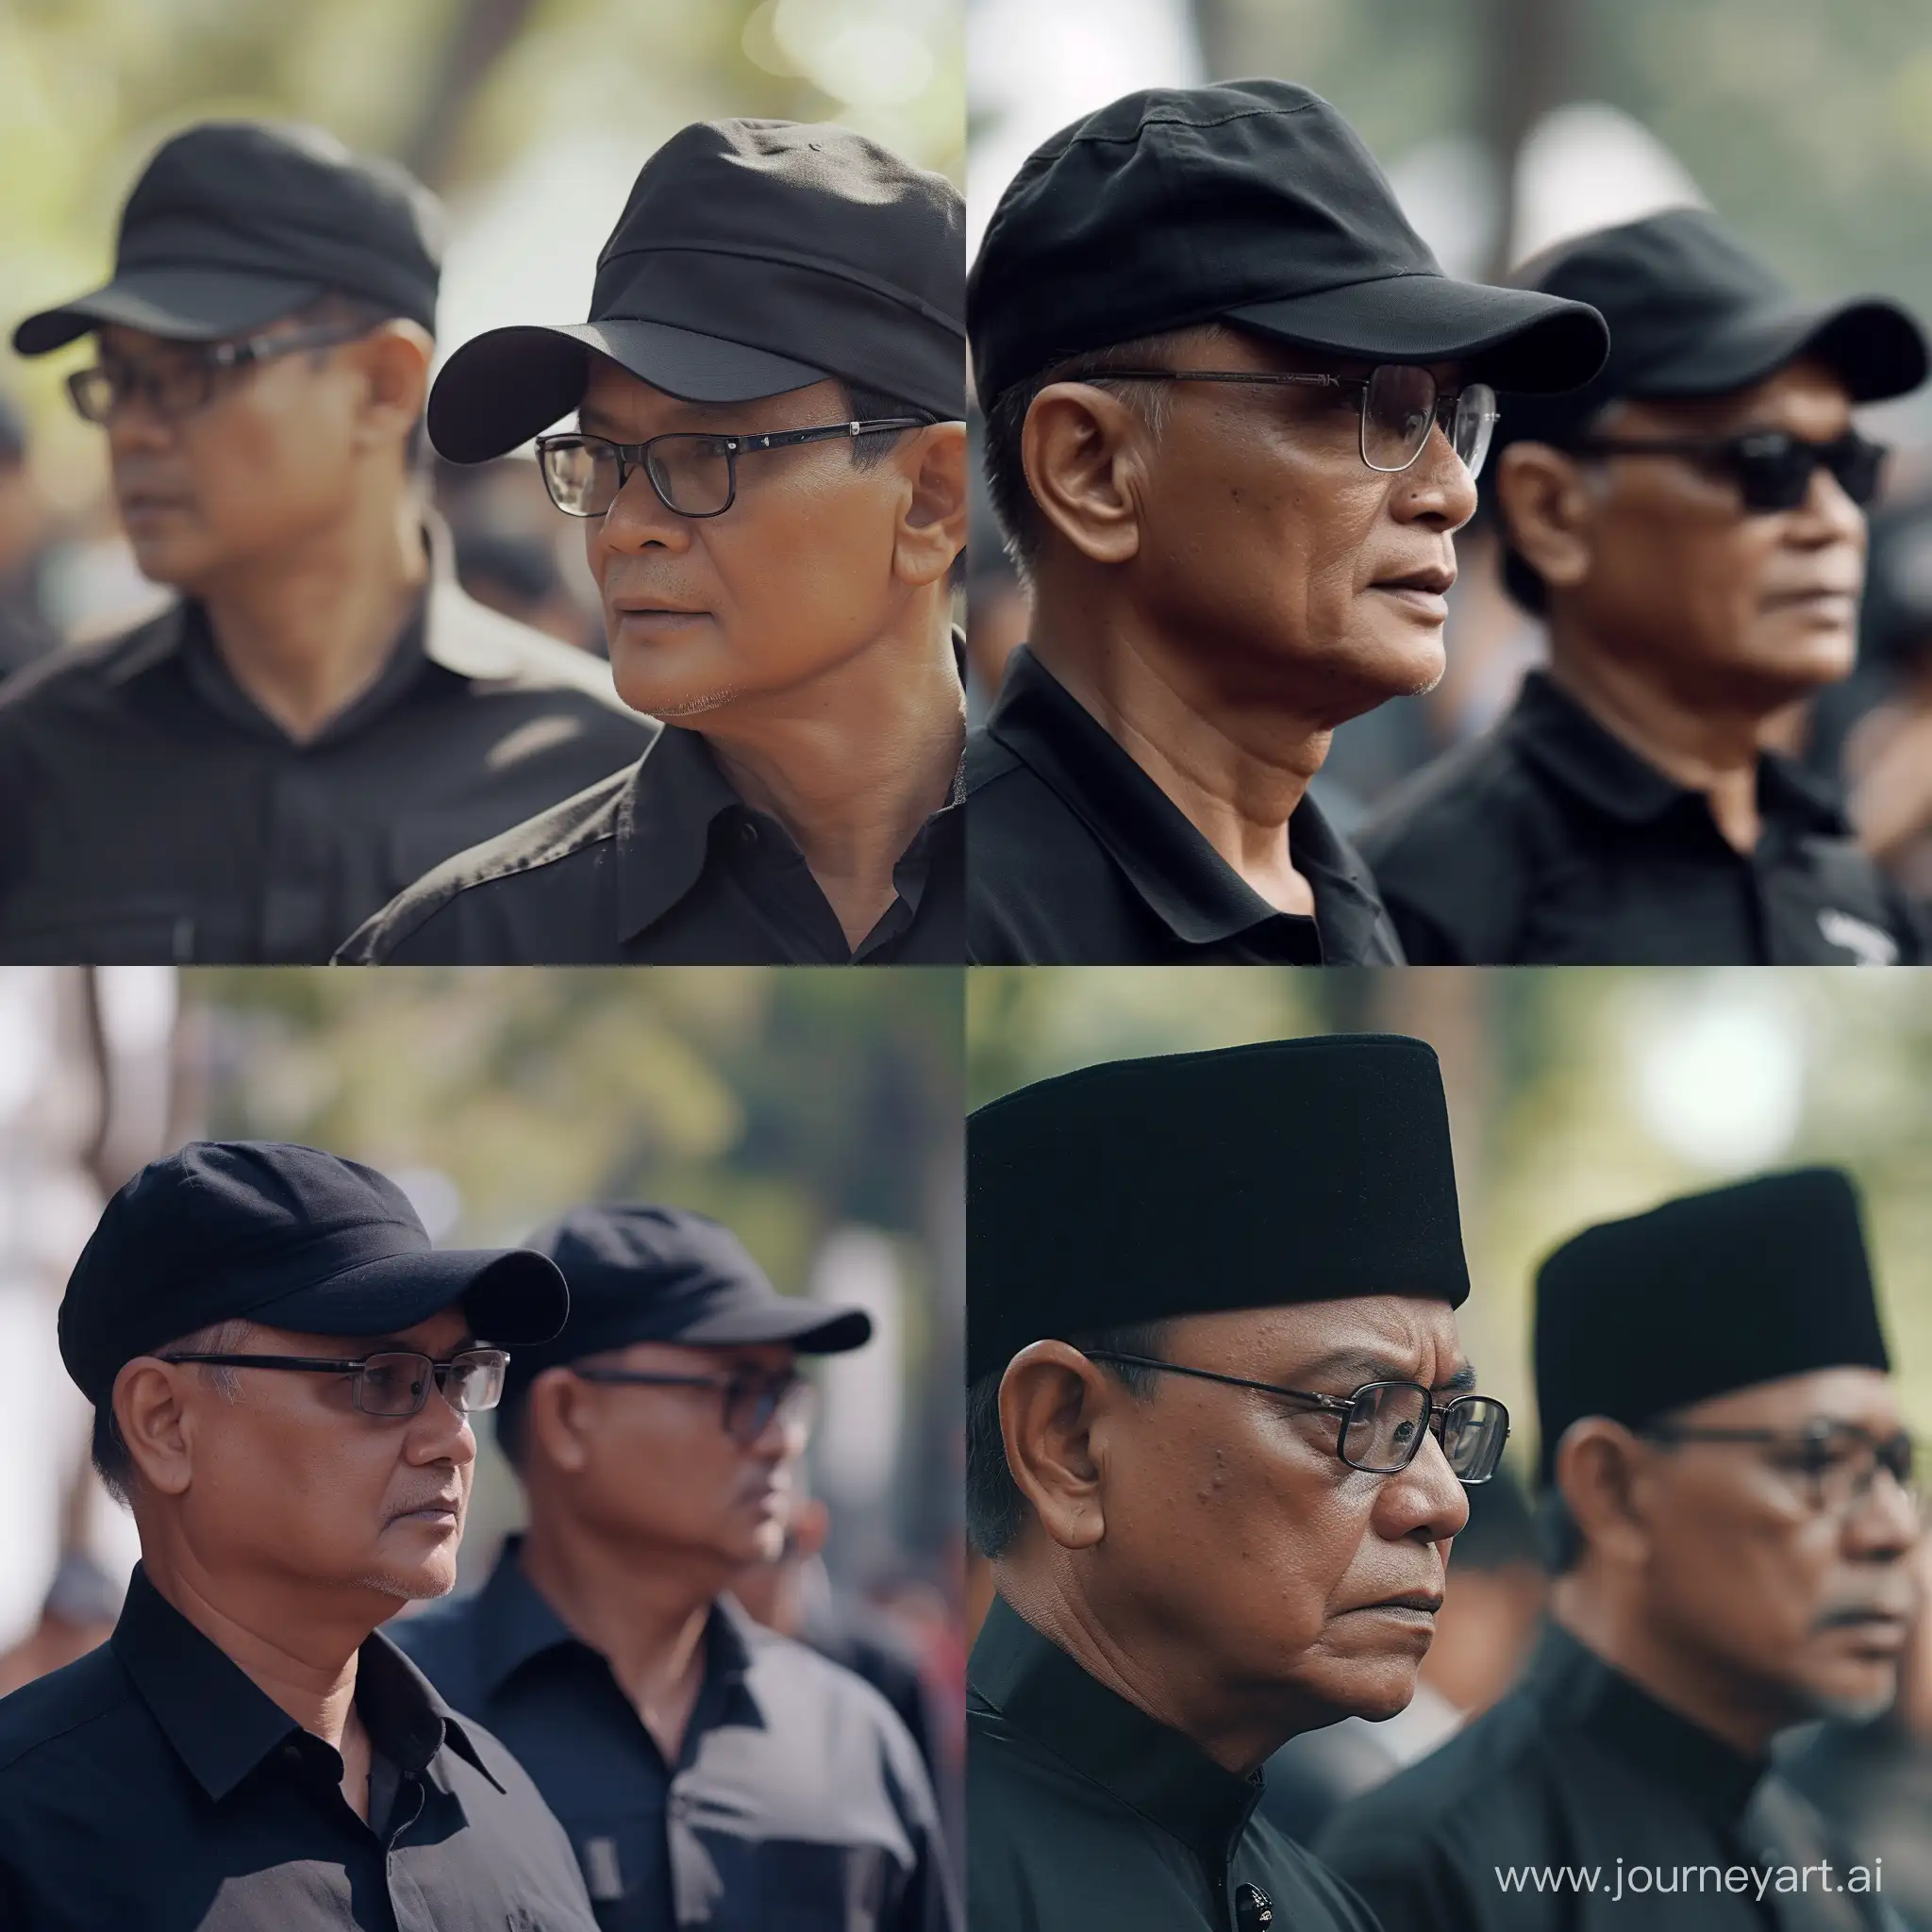 2 men who are candidates for Indonesian president are wearing black caps, the first man is wearing glasses, they are walking from a distance. movie scene